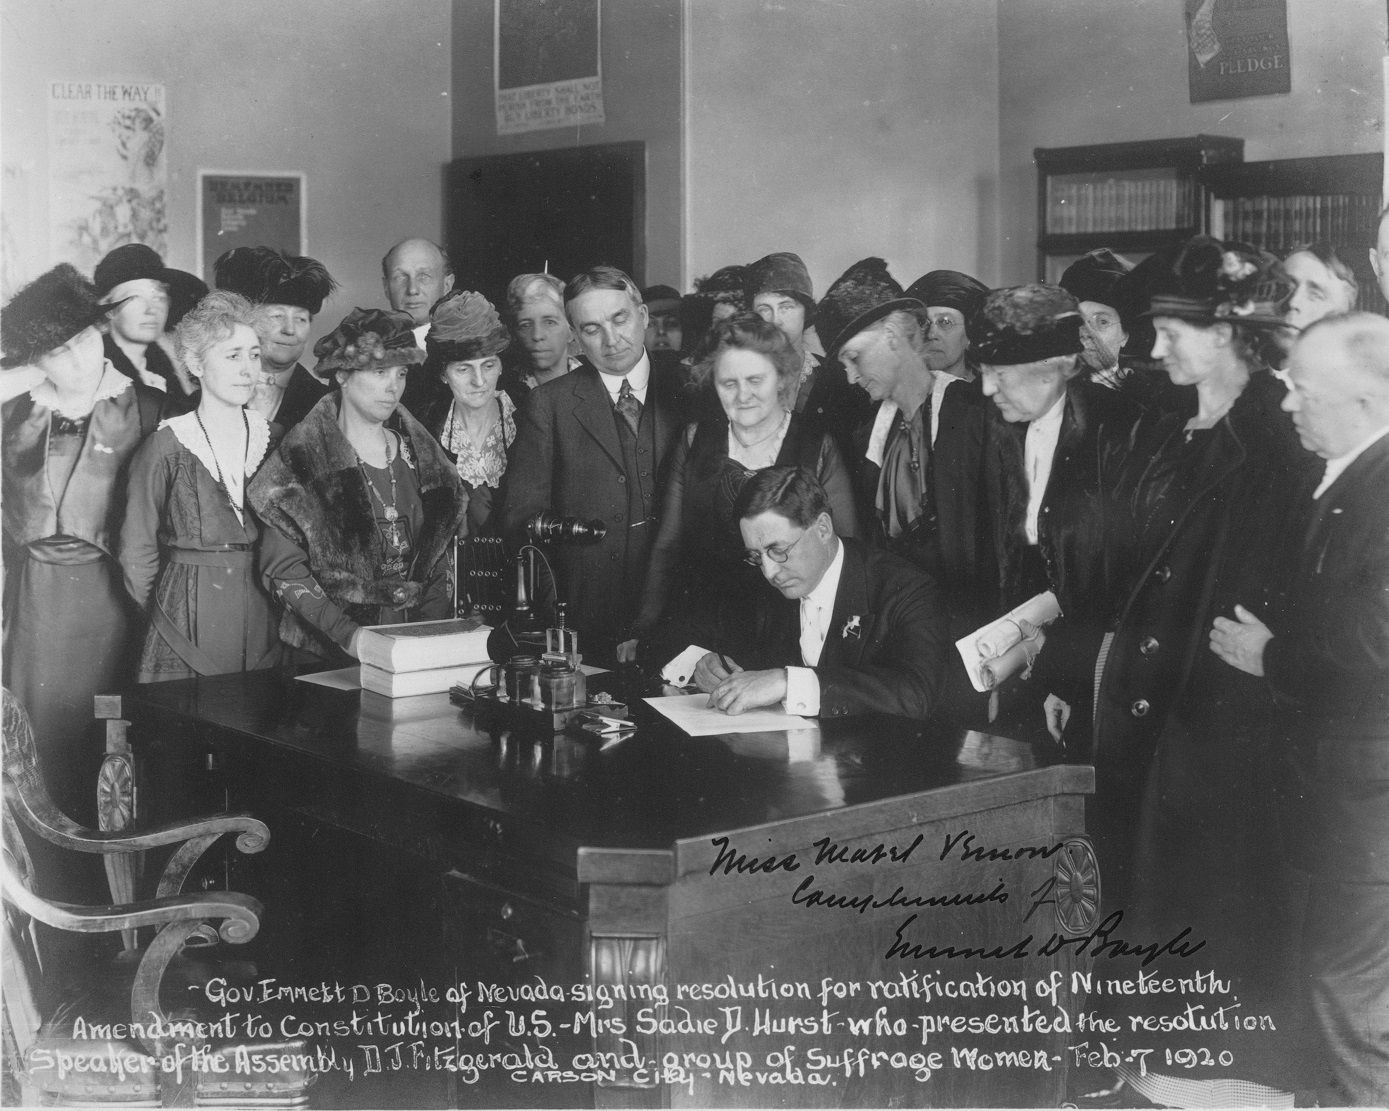 Governer Boyle signing resolution of radification of the 19th Amendment